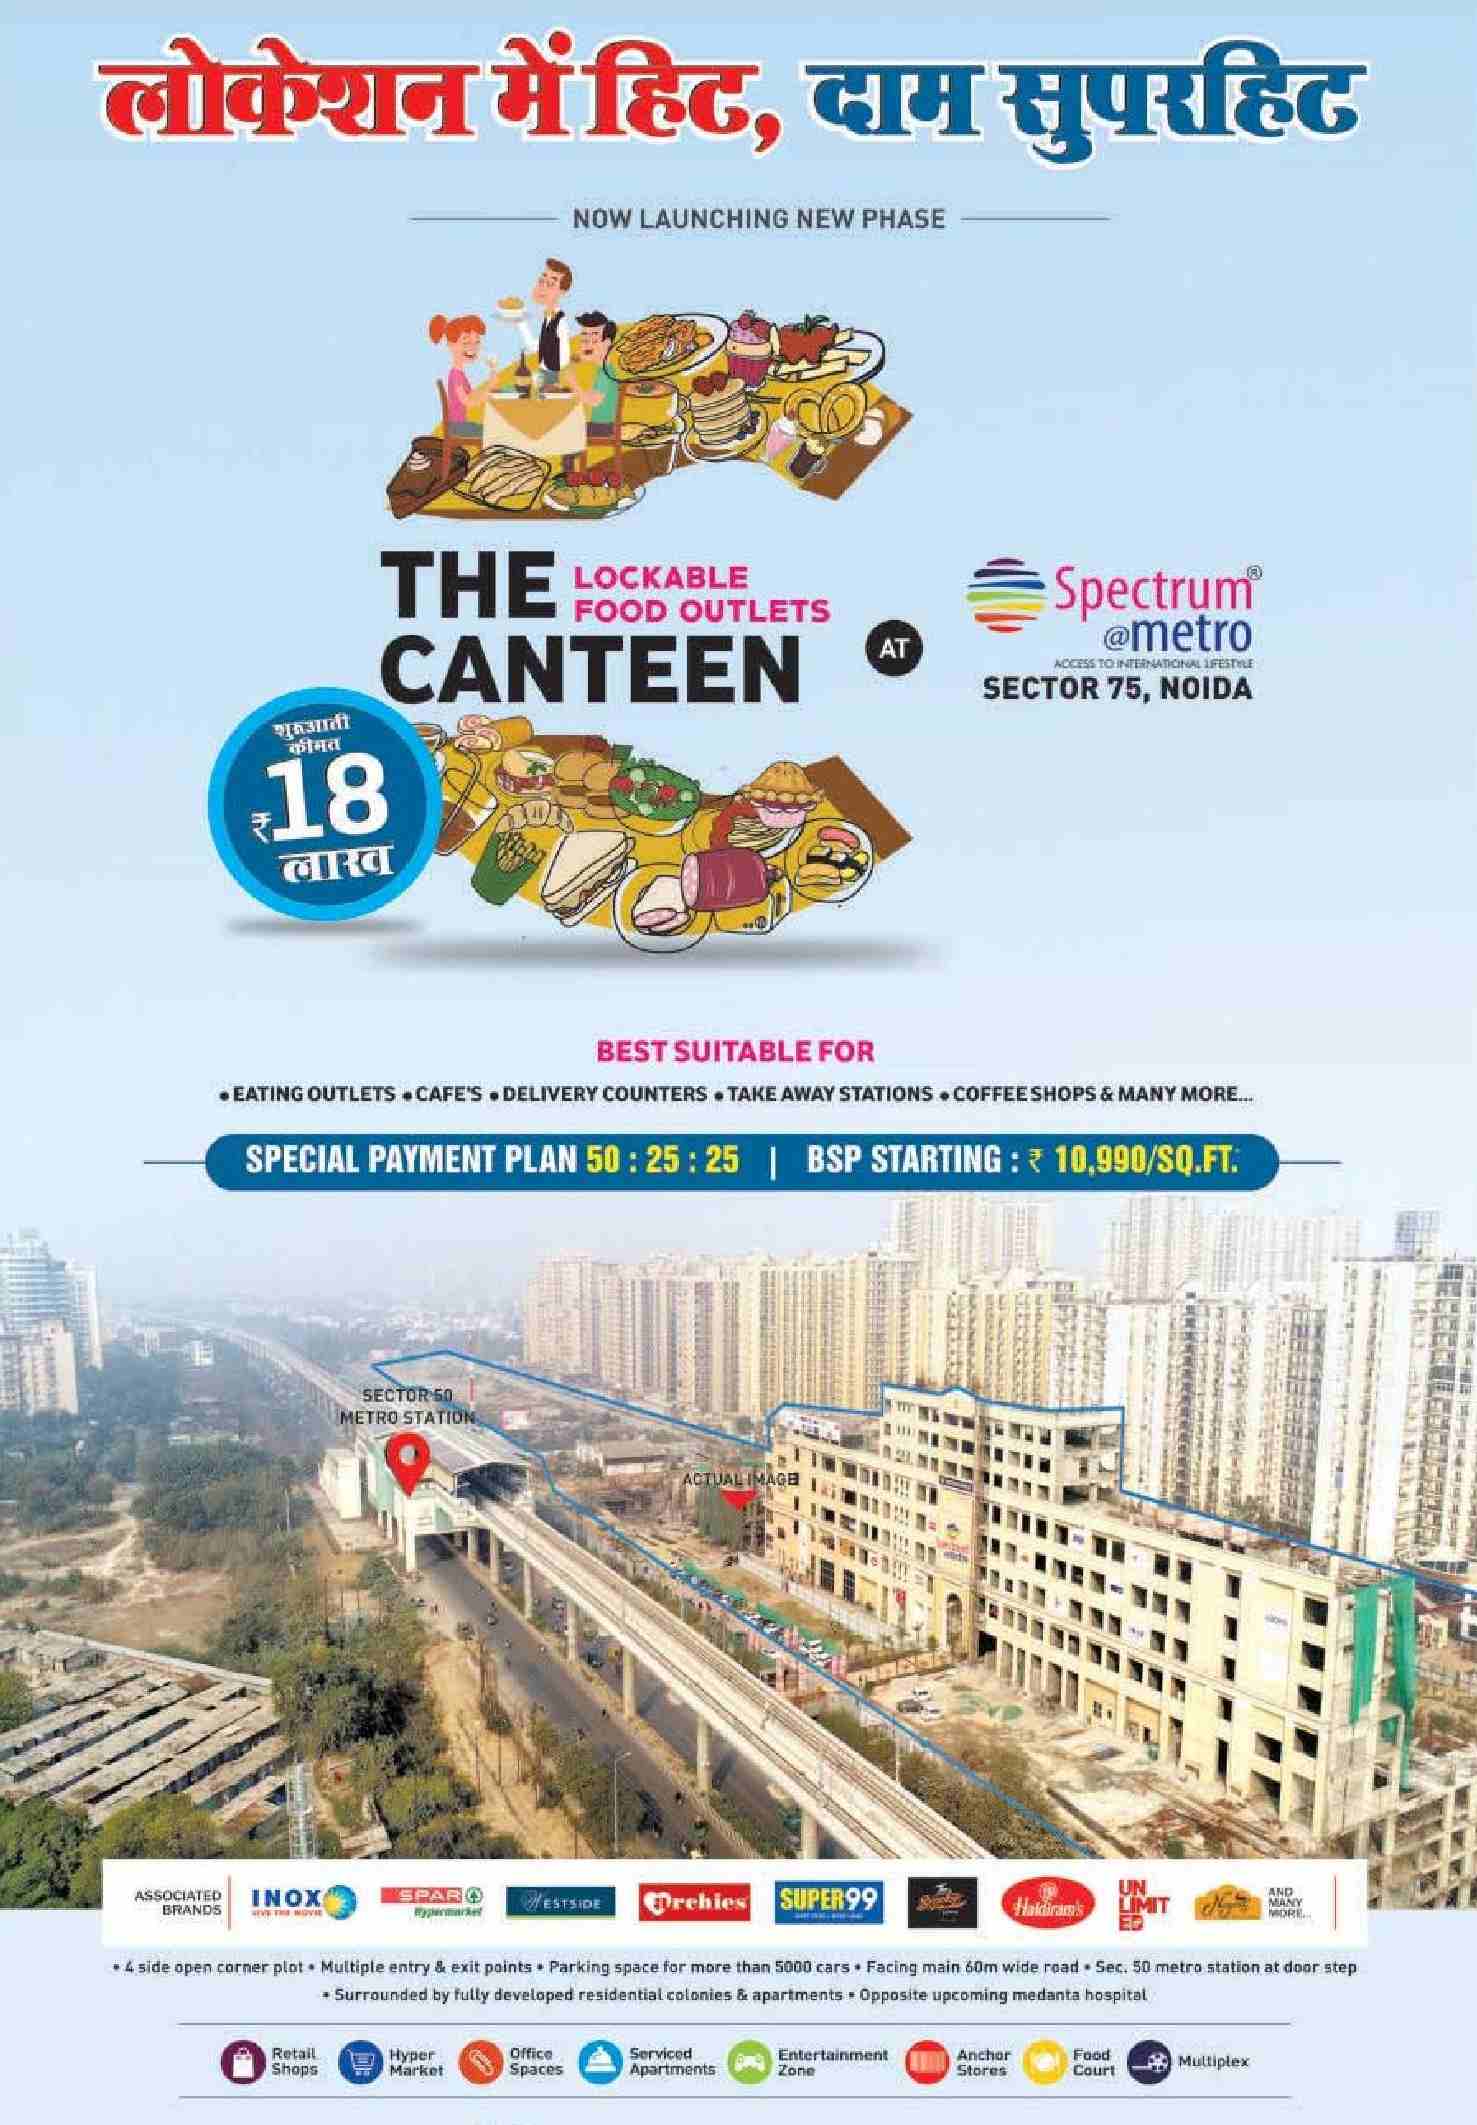 Avail special payment plan of 50:25:25 at Blue Spectrum Metro in Sector 75, Noida Update